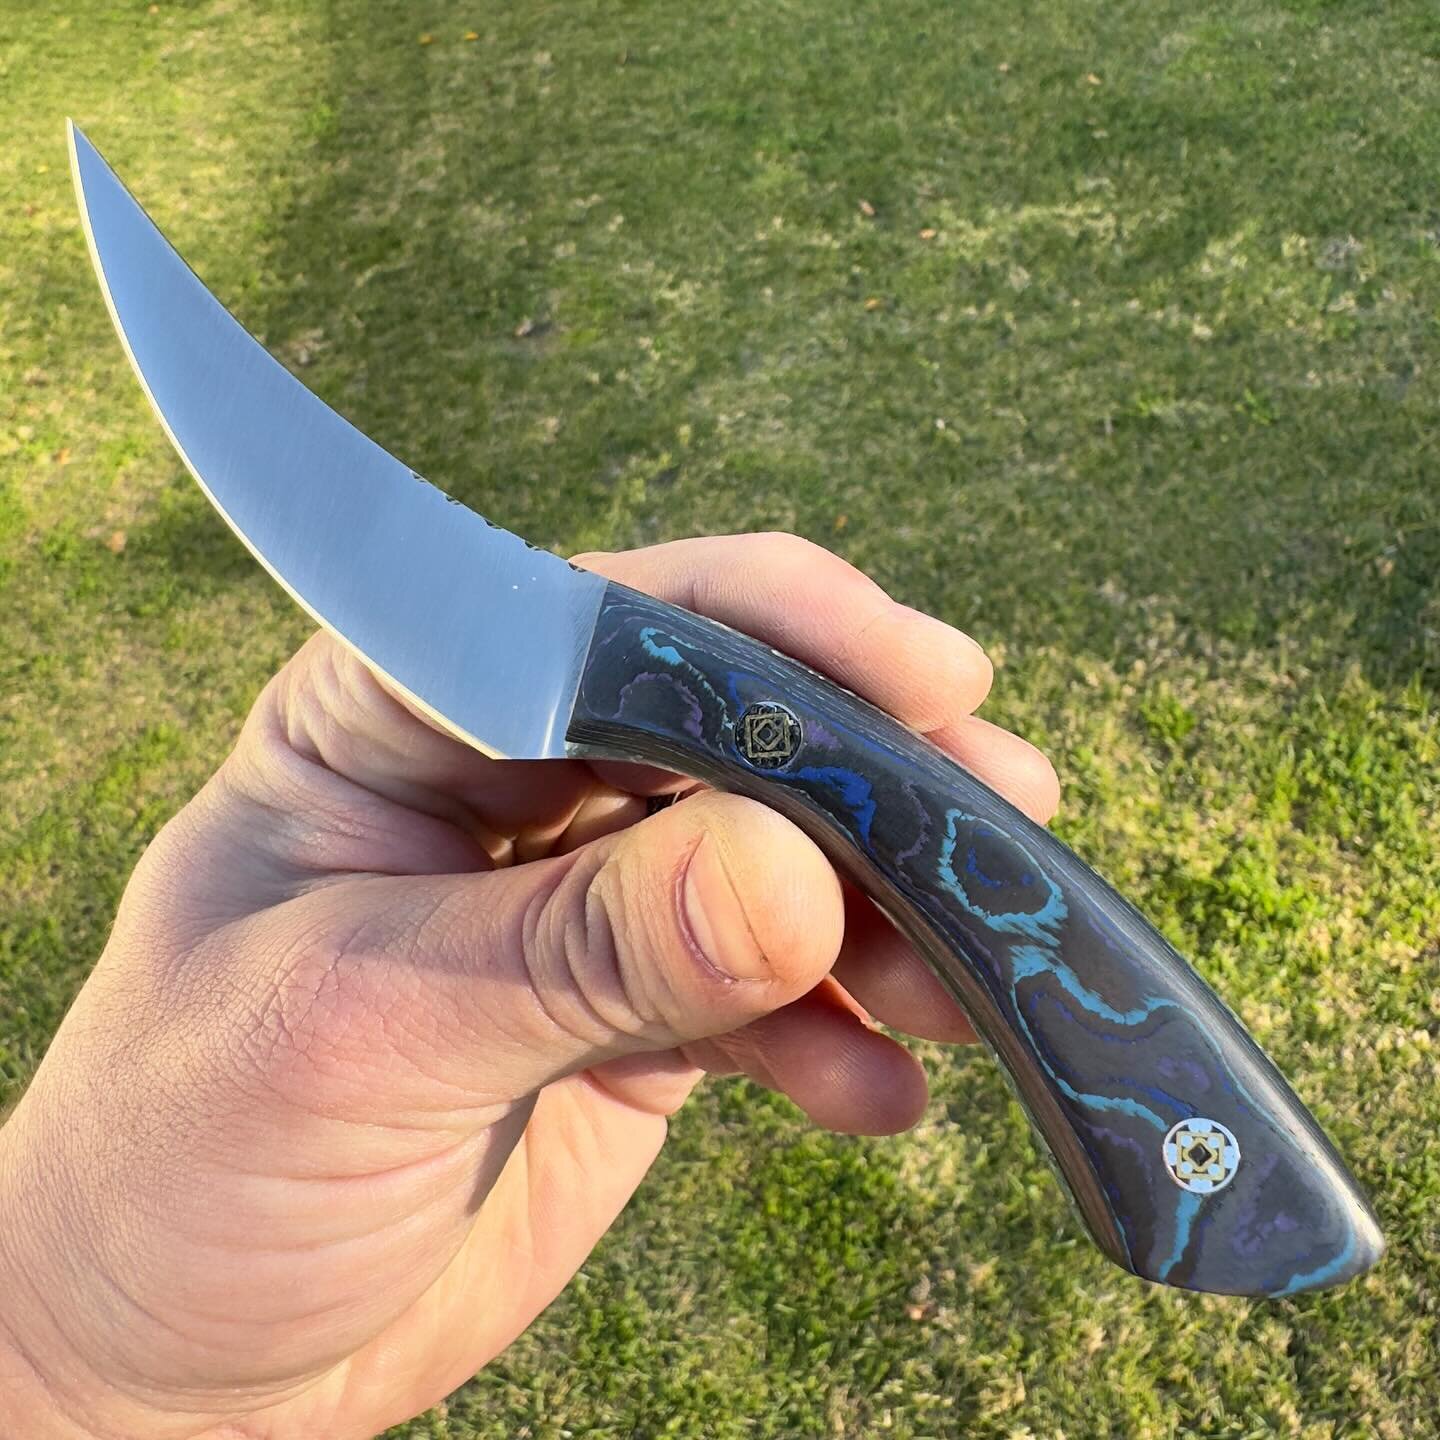 Tarek - An EDC Persian style fixed blade!
Blade - S90v
Handle - Blue carbon fiber from @camocarbon and blue glow liner with shredded aluminum from @traviszumwalt 
*TAKEN*